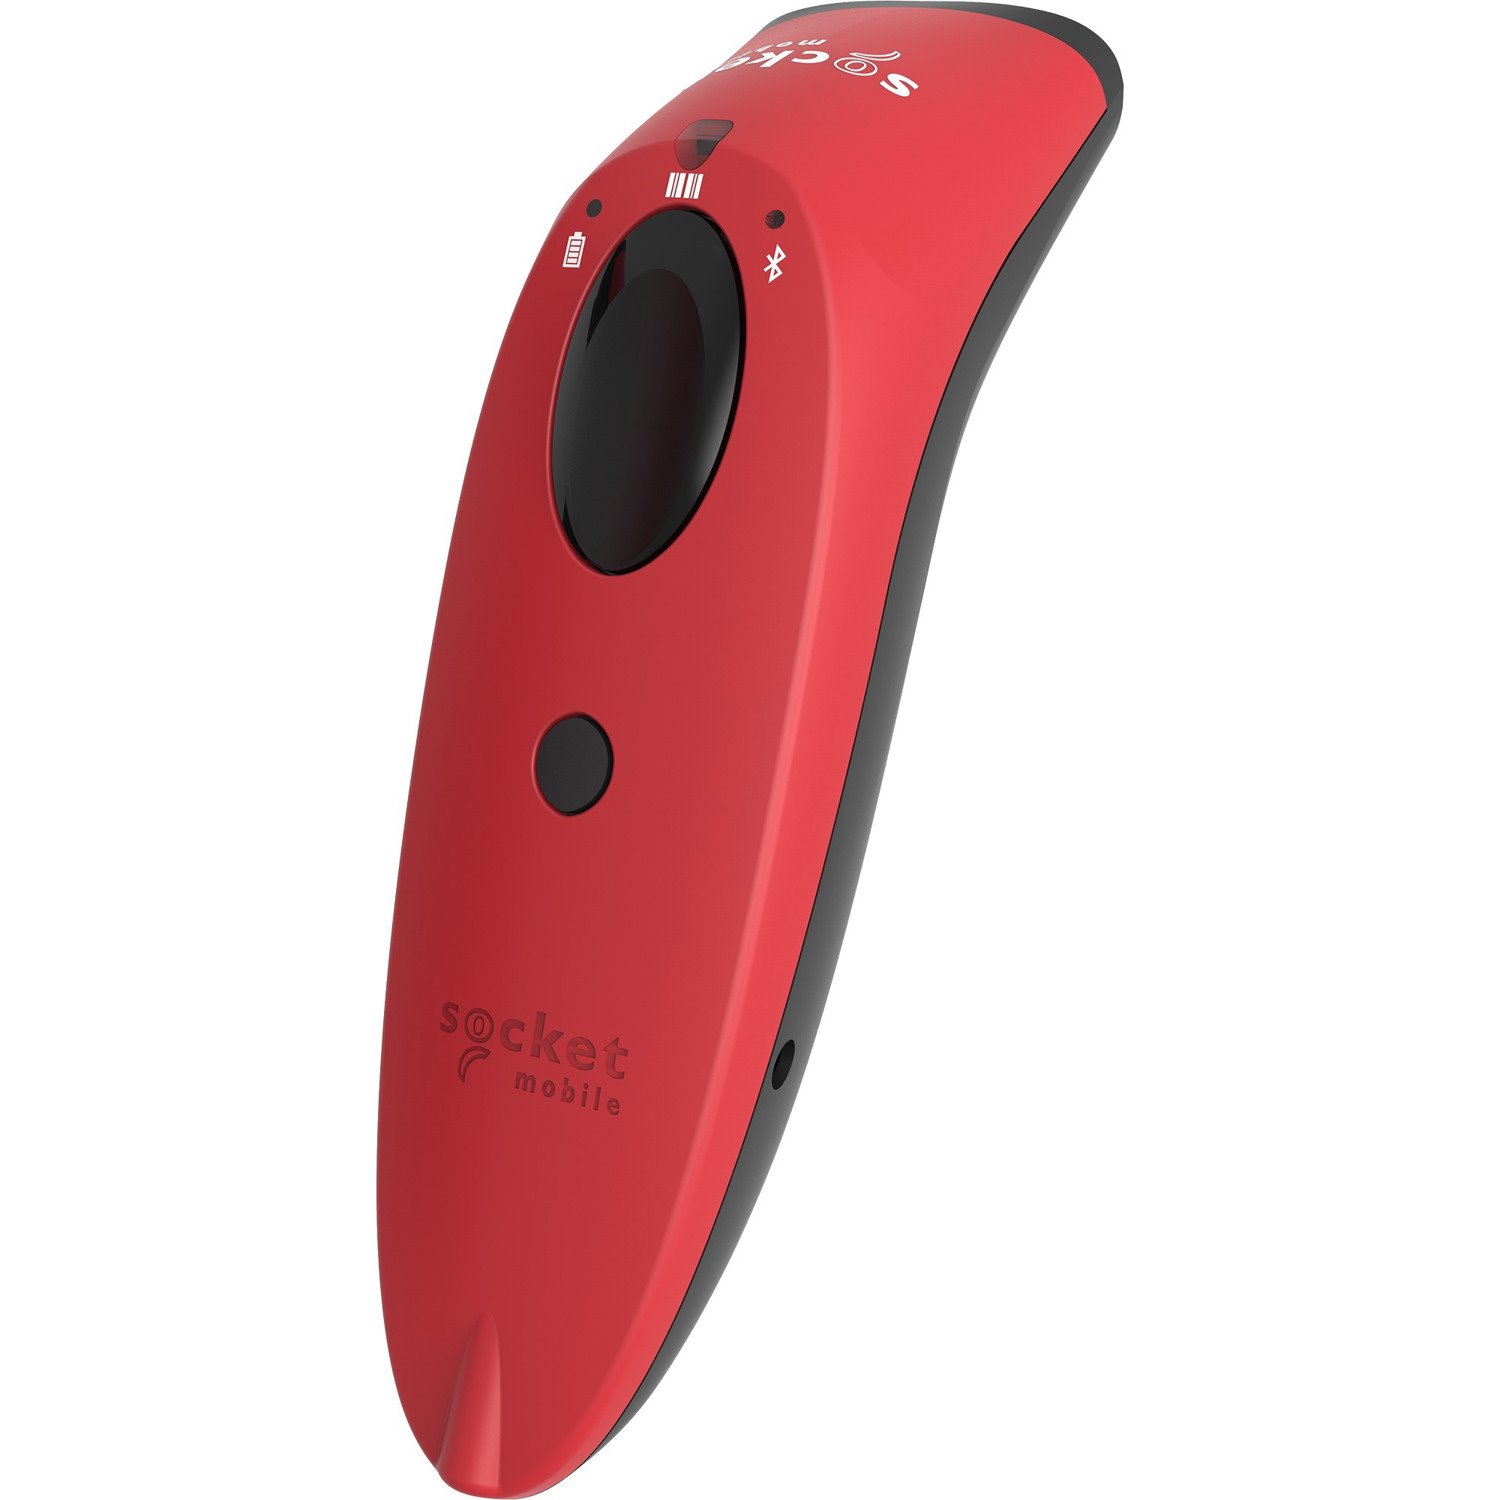 Socket Mobile SocketScan S730 Handheld Barcode Scanner - Wireless Connectivity - Red